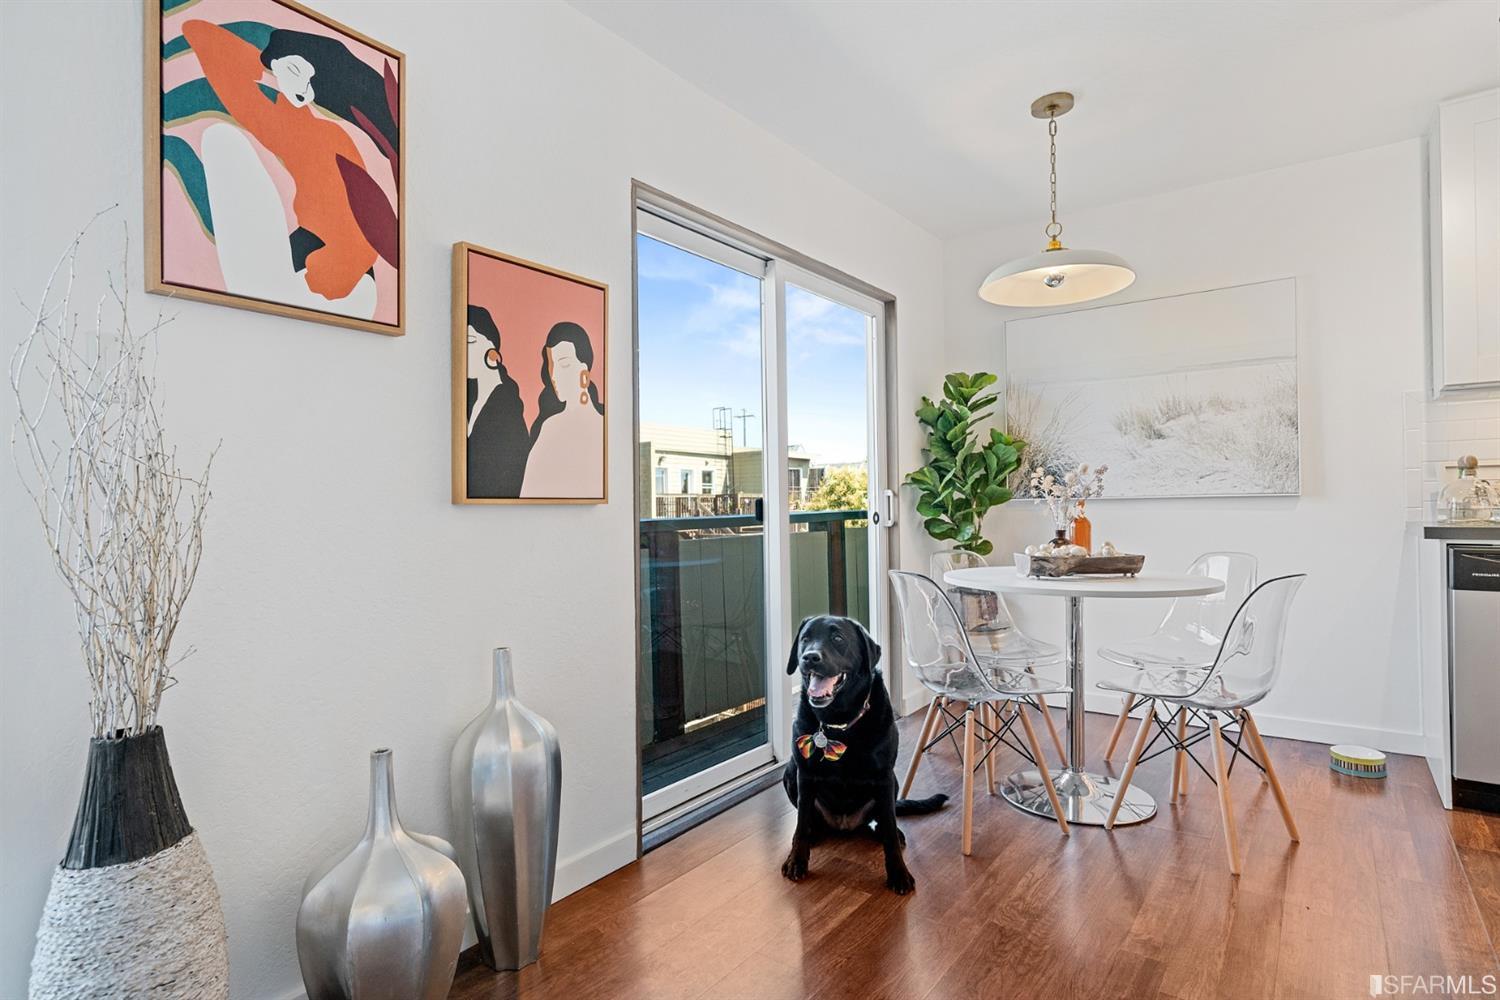 Listed with Kevin Ho + Jonathan McNarry: 875 Vermont Street, No. 204: Just-updated 1-bed, 1-bath, 1-car parking, Potrero condominium with in-unit laundry that’s comfortable, bright and relaxed. San Francisco MLS 503836, www.875-vermont.com (http://www.875-vermont.com/)